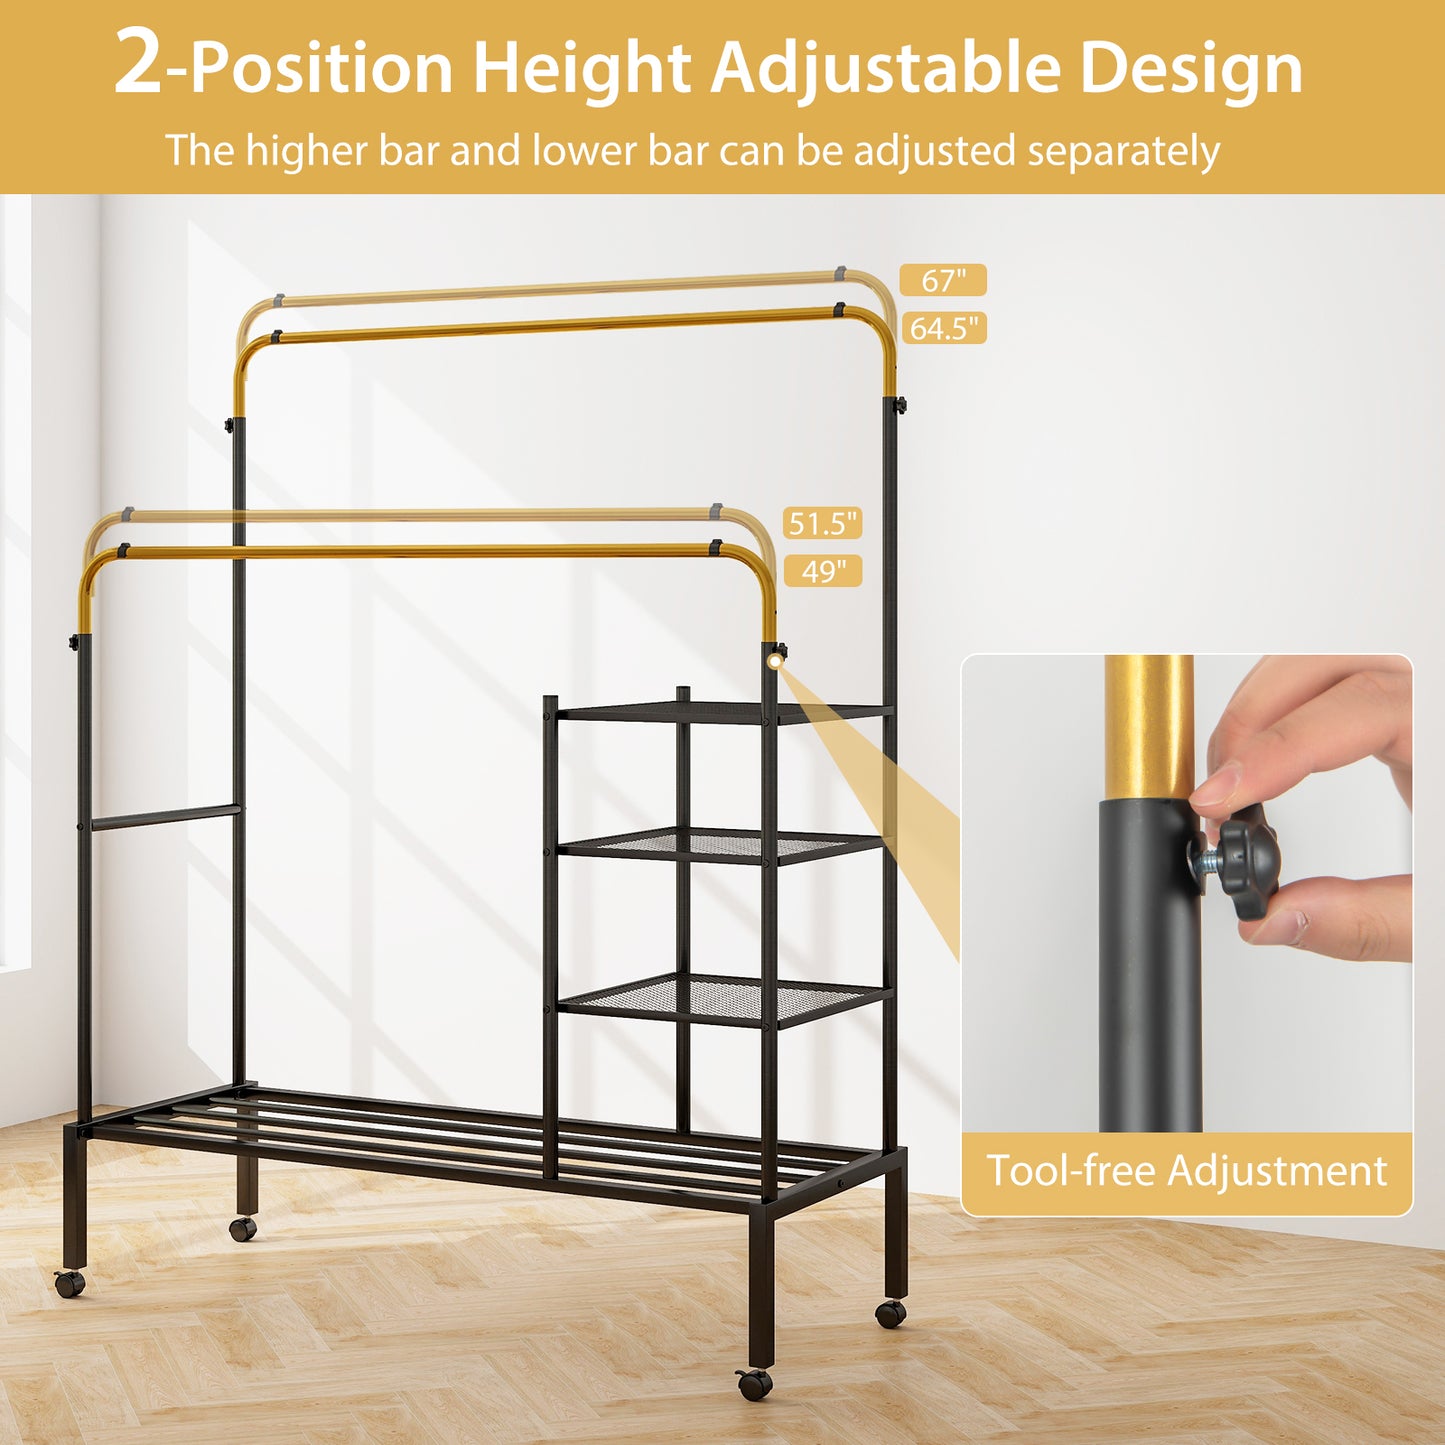 Rolling Double Rods Garment Rack with Height Adjustable Hanging Bars-Golden